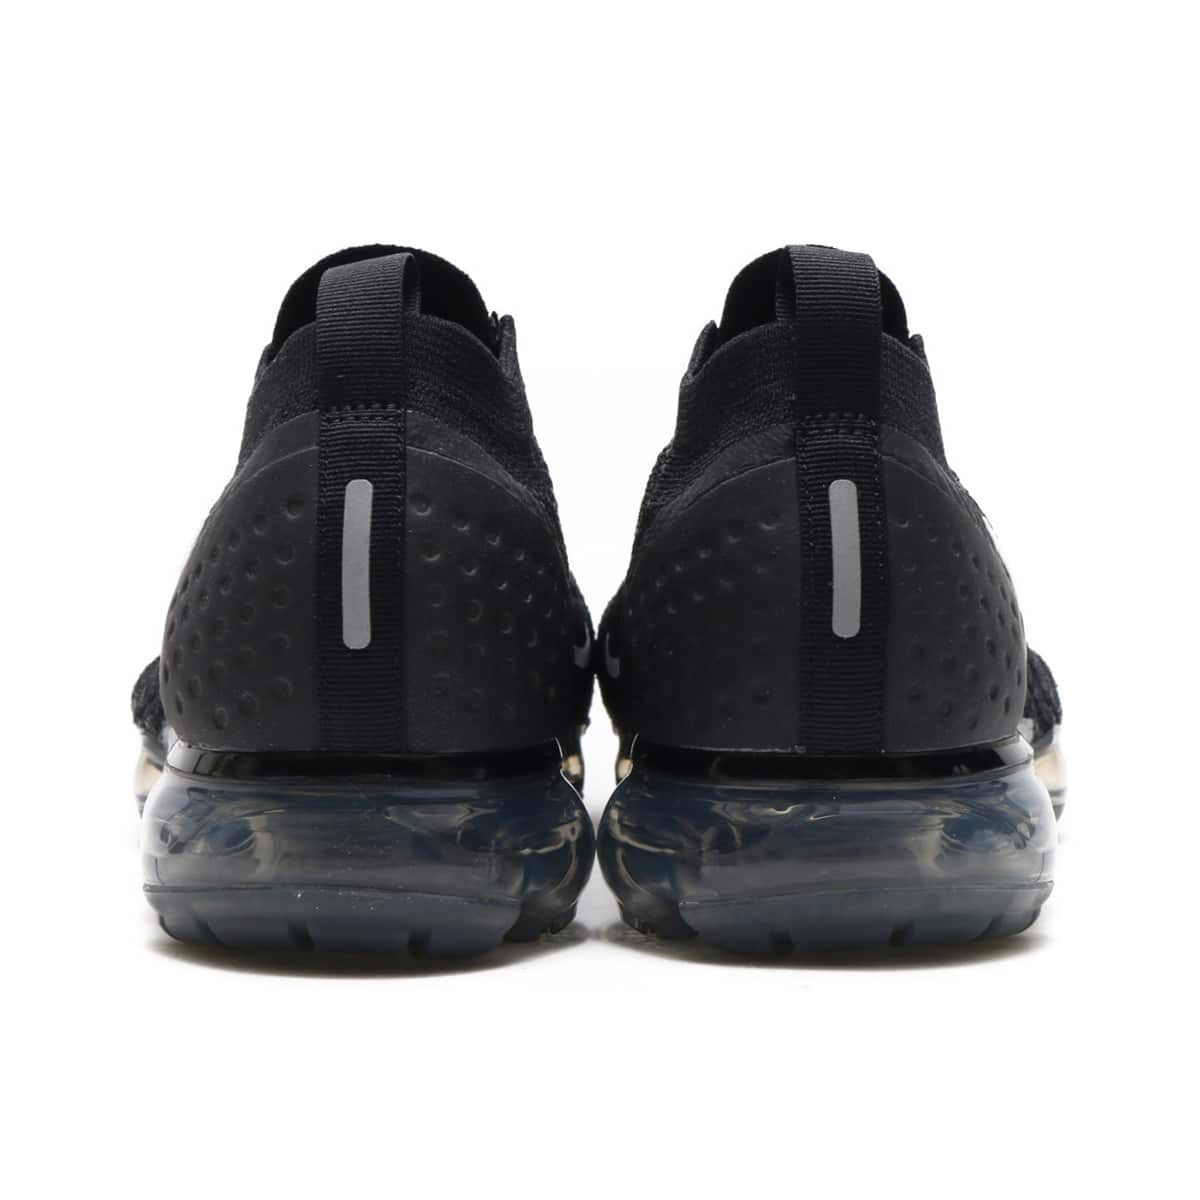 vapormax flyknit 2 black and white